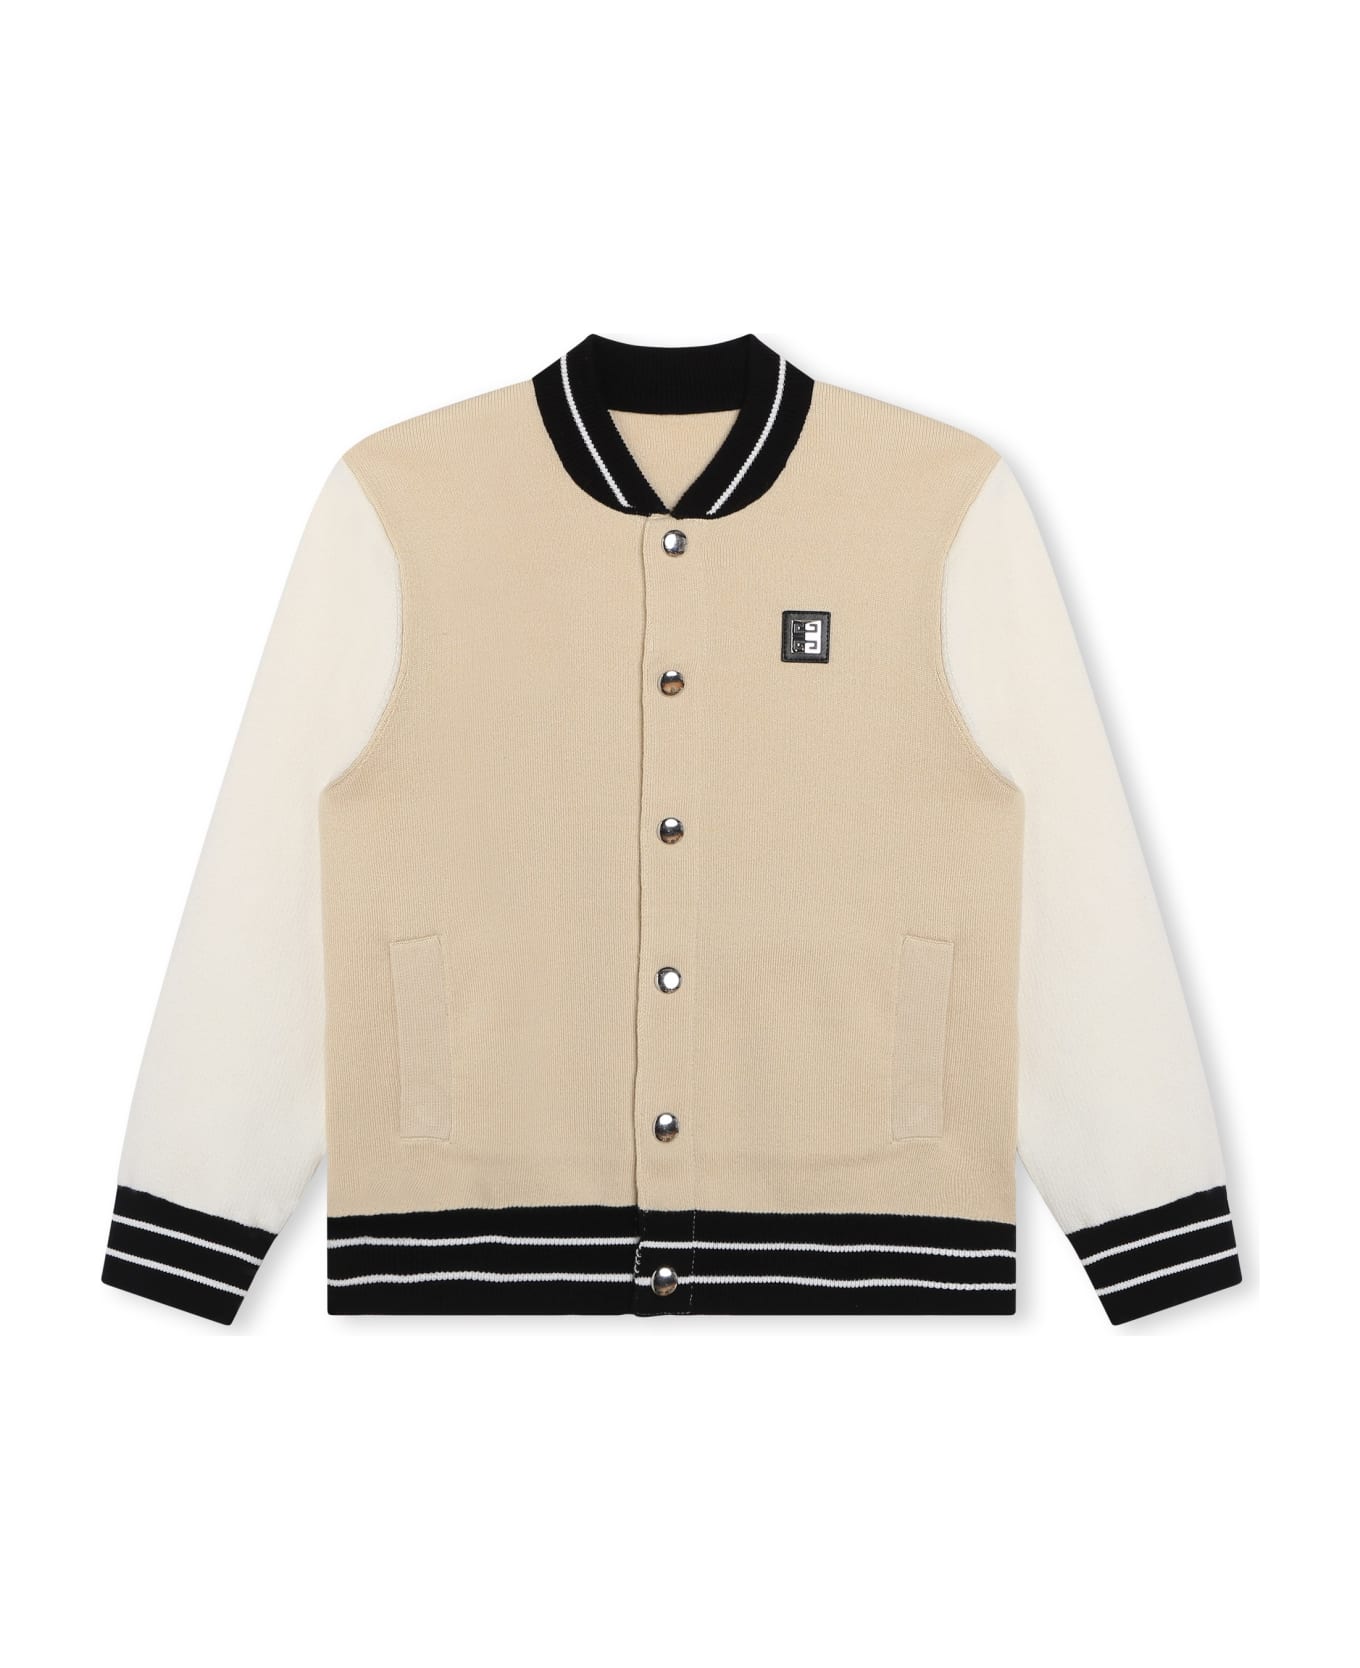 Givenchy Bomber Jacket With Patch - Beige